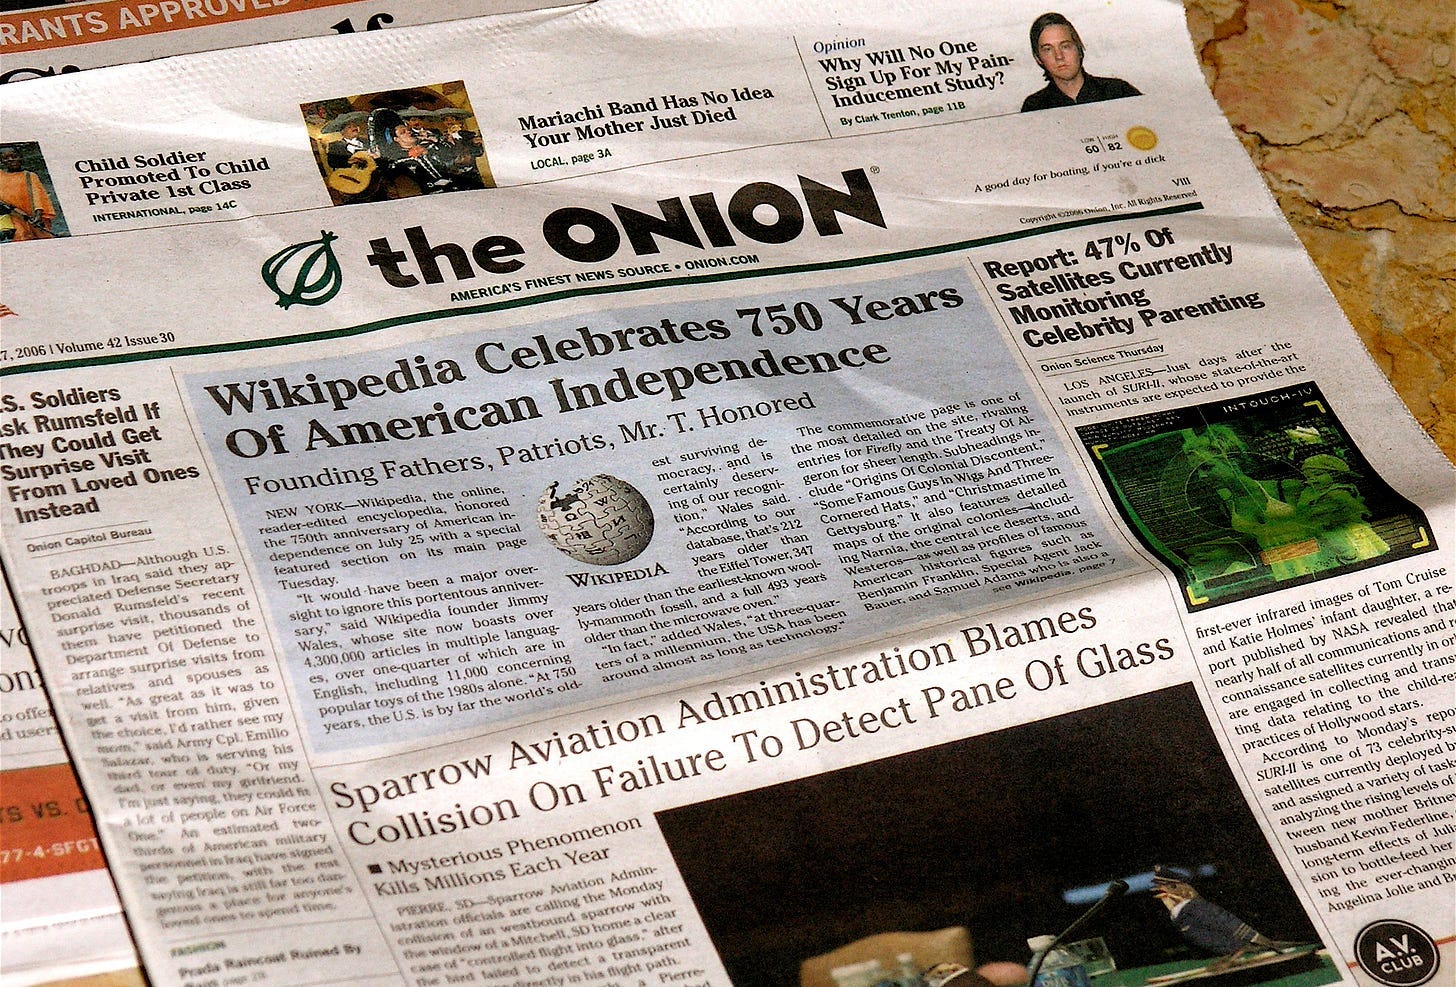 The Paris Review - Working at “The Onion”: Adventures in Tastelessness